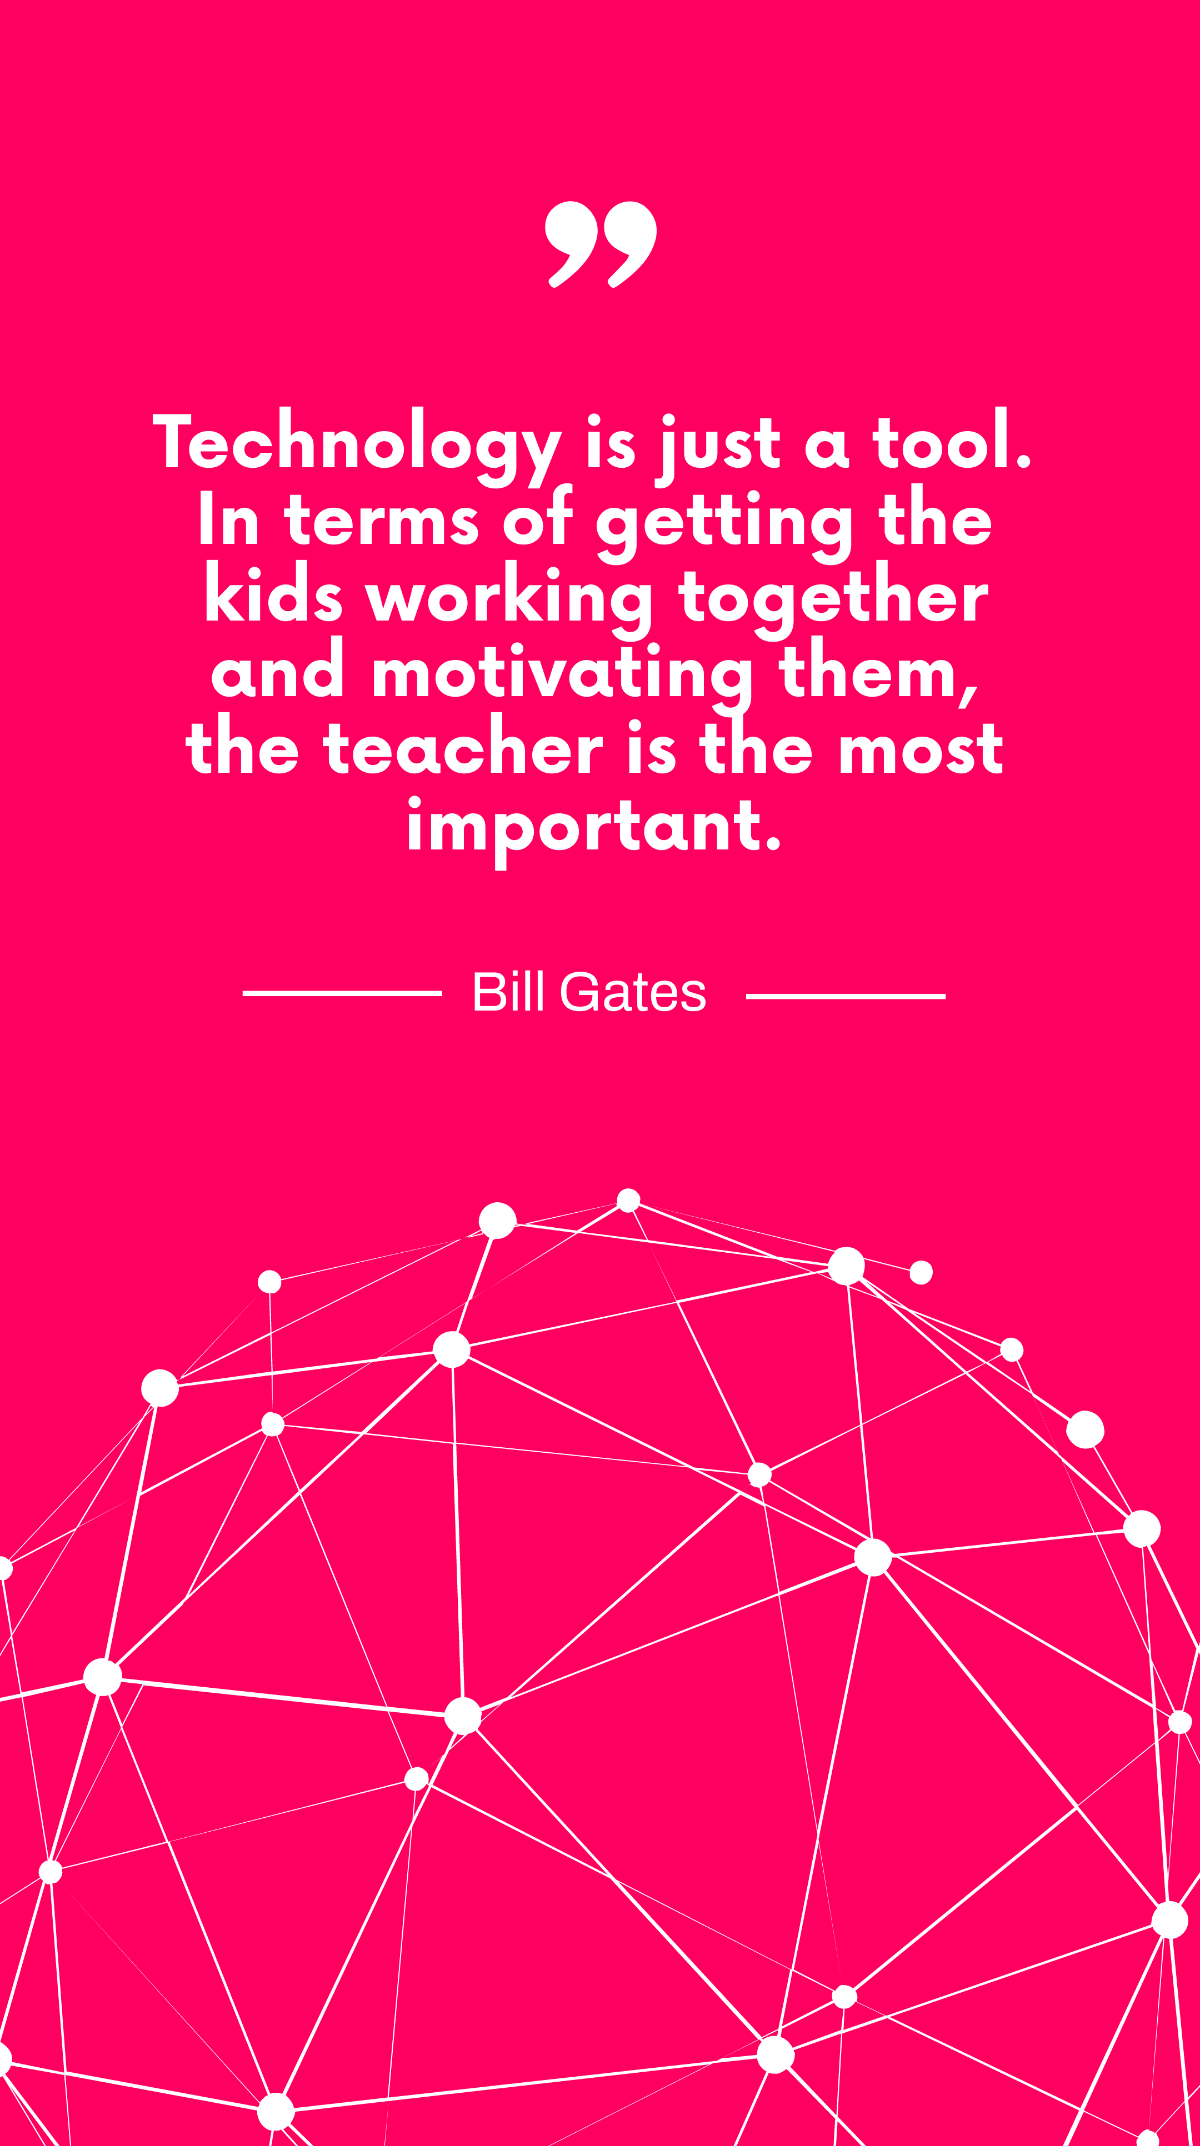 Bill Gates - Technology is just a tool. In terms of getting the kids working together and motivating them, the teacher is the most important. Template